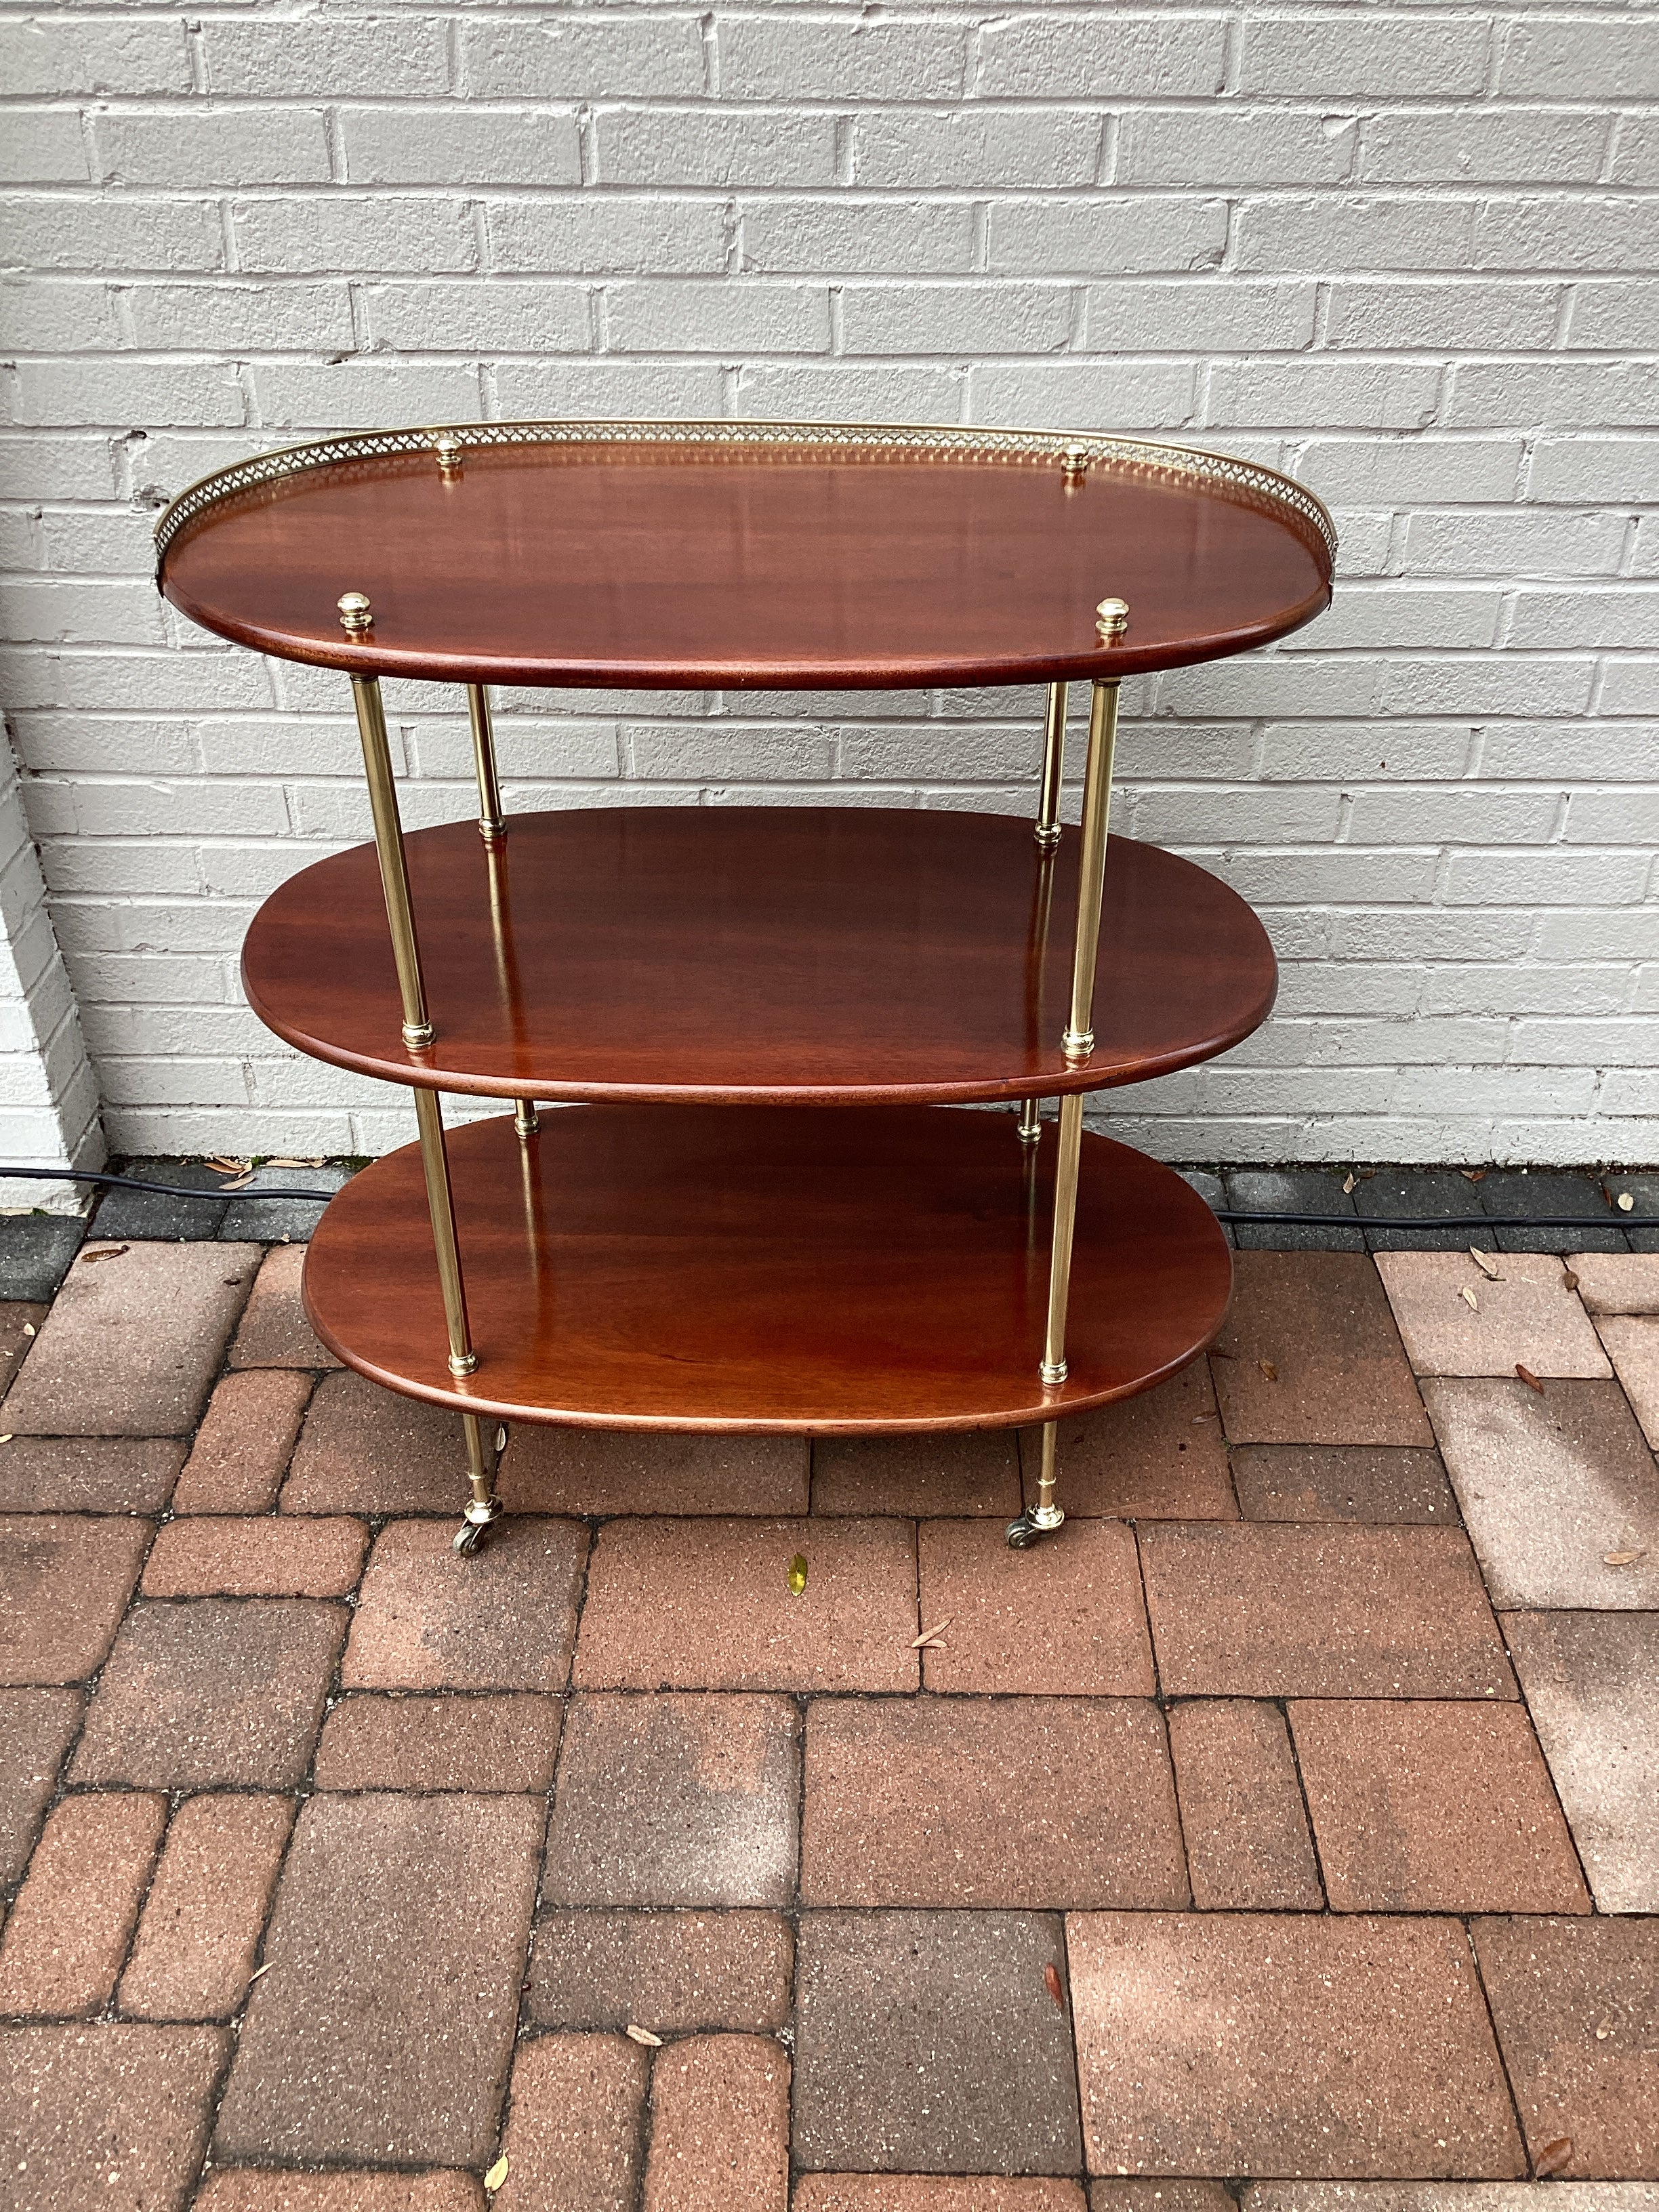 Vintage British Campaign style side table or bar cart with three oval mahogany tiers, top tier with a pierced brass gallery, each tier separated by brass support. Table rests on castors.  Completely restored.